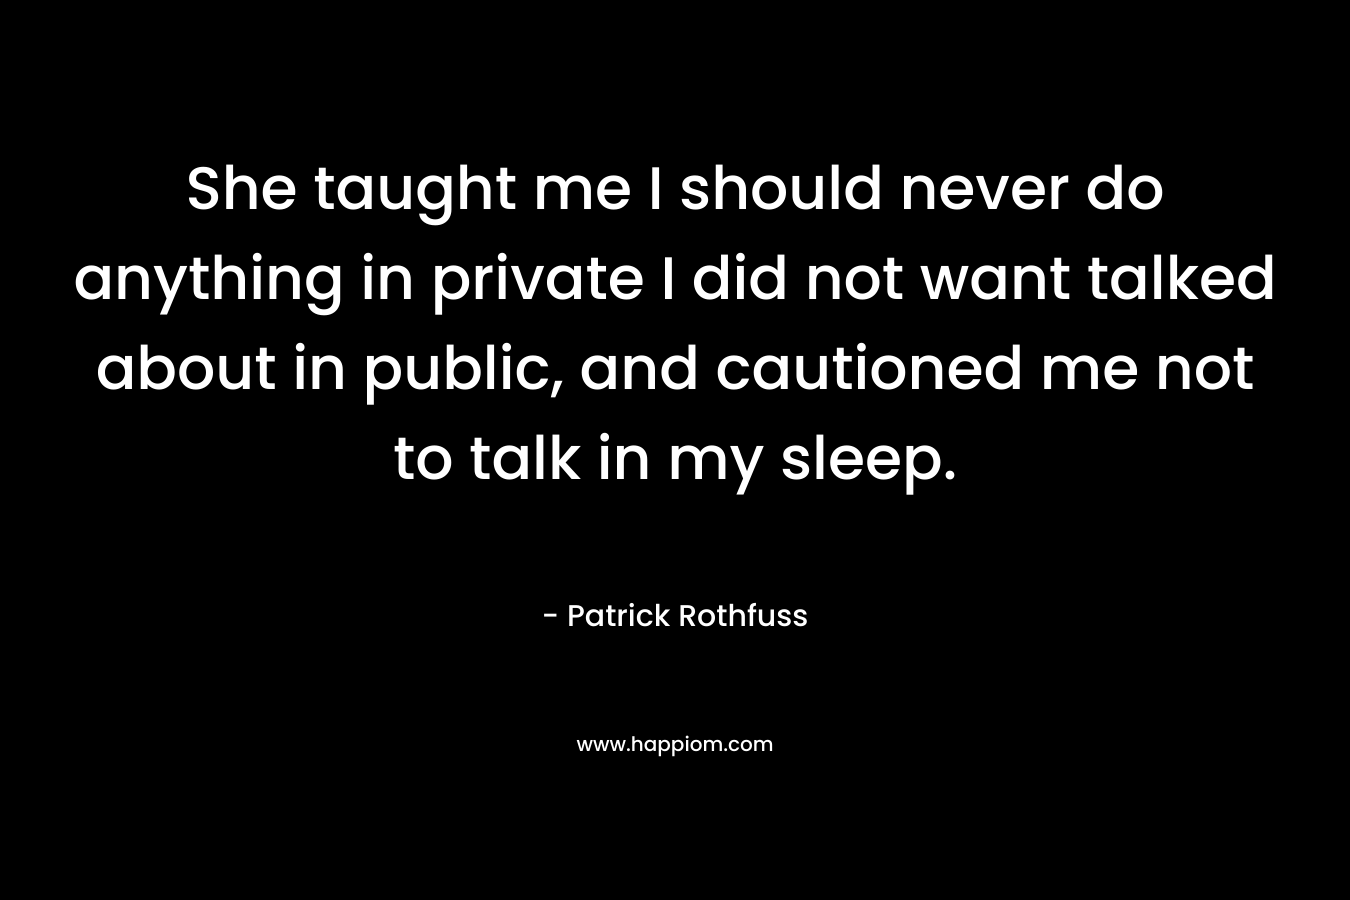 She taught me I should never do anything in private I did not want talked about in public, and cautioned me not to talk in my sleep. – Patrick Rothfuss